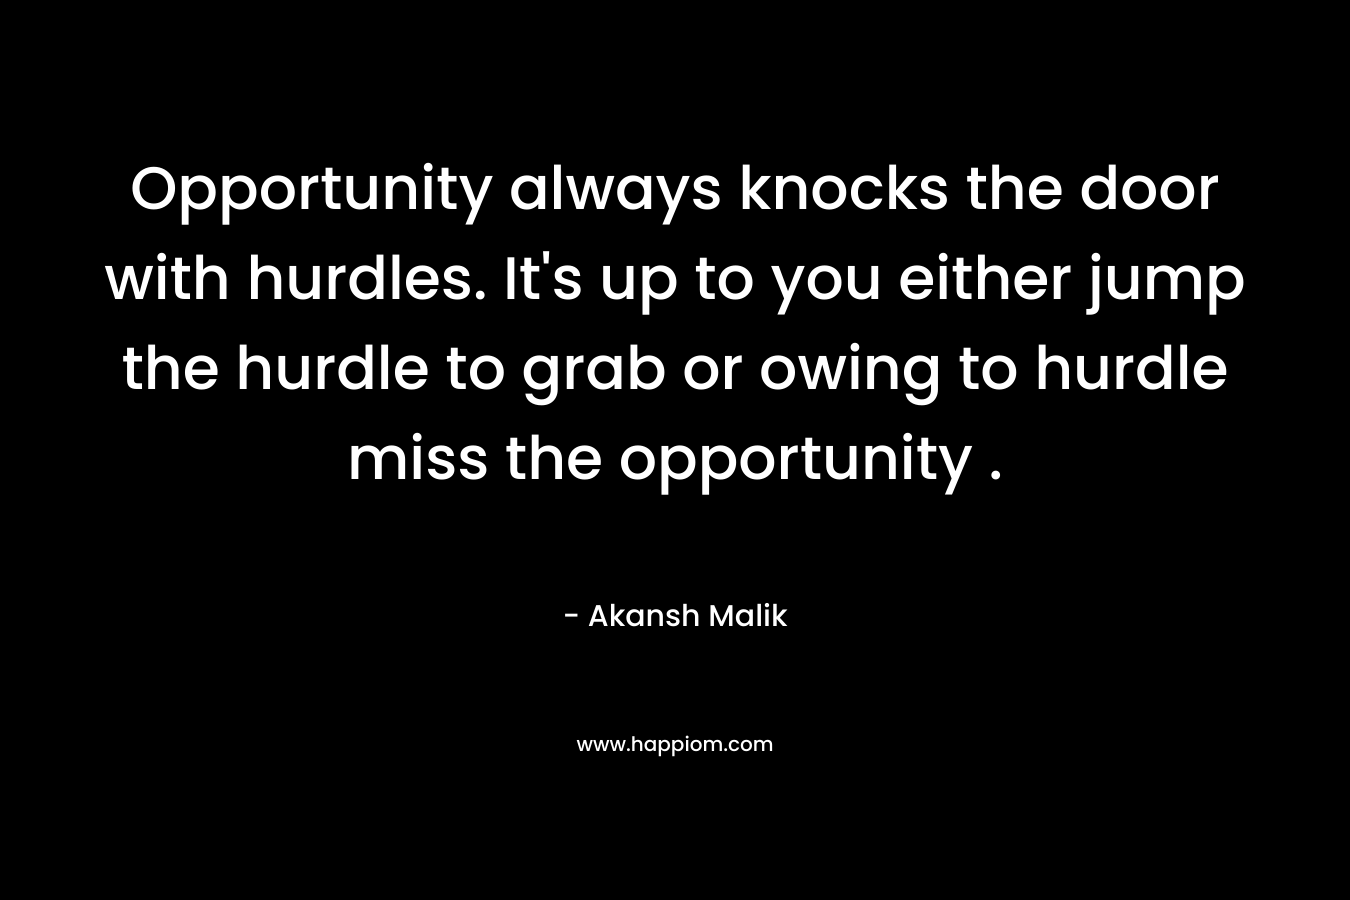 Opportunity always knocks the door with hurdles. It's up to you either jump the hurdle to grab or owing to hurdle miss the opportunity .